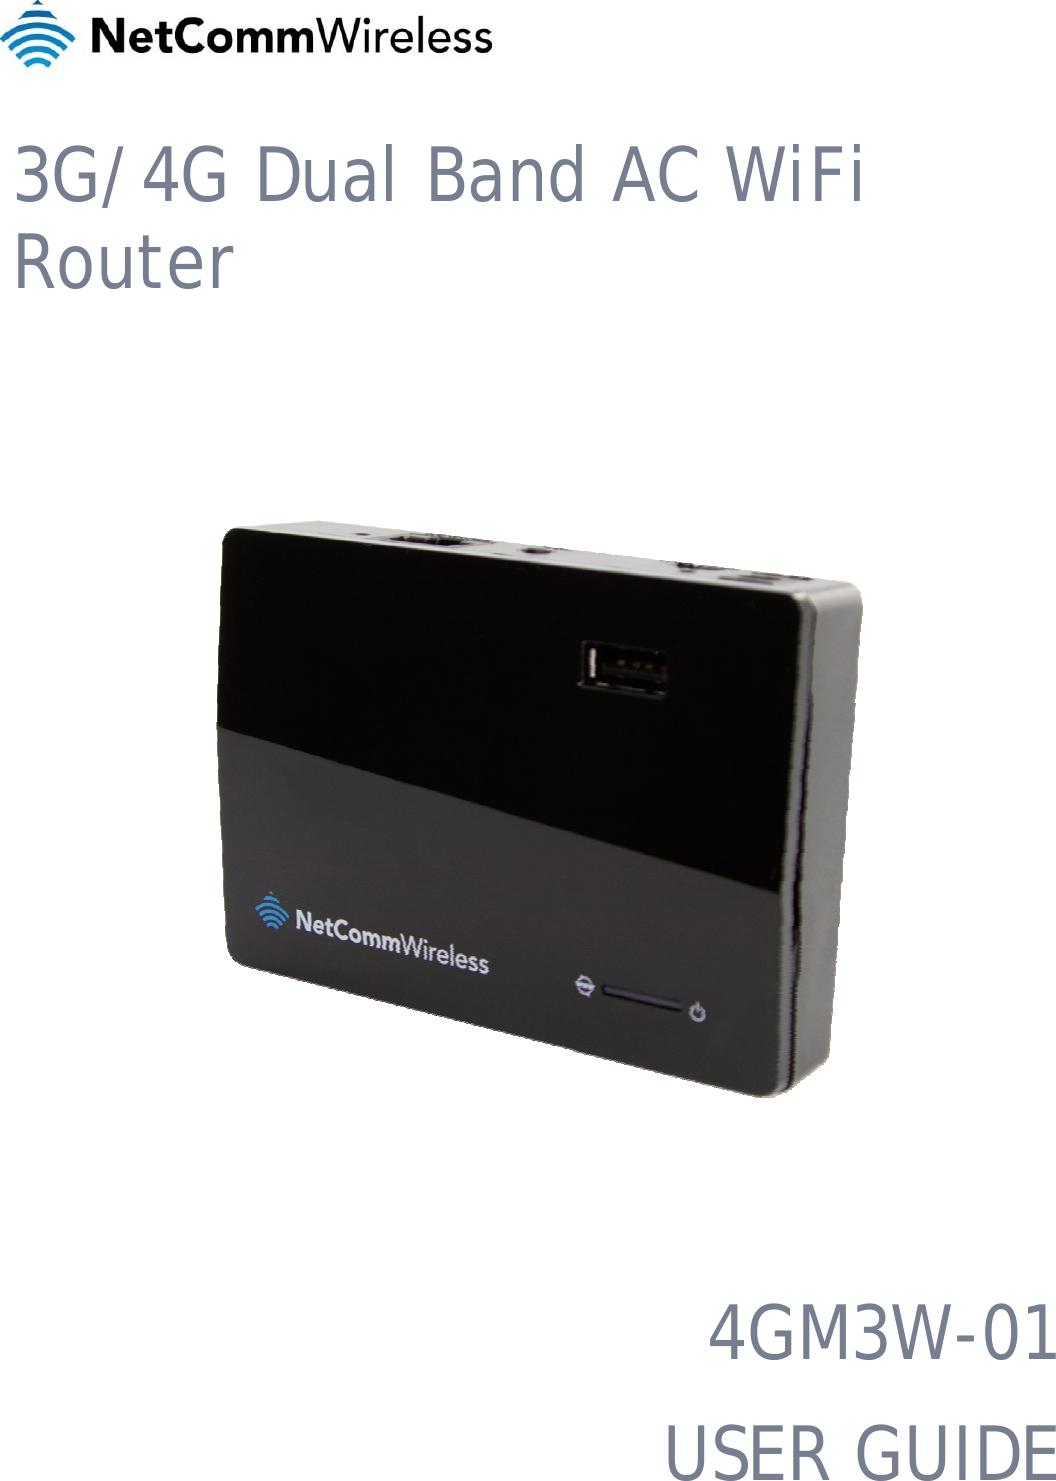  3G/4G Dual Band AC WiFi Router    4GM3W-01 USER GUIDE 